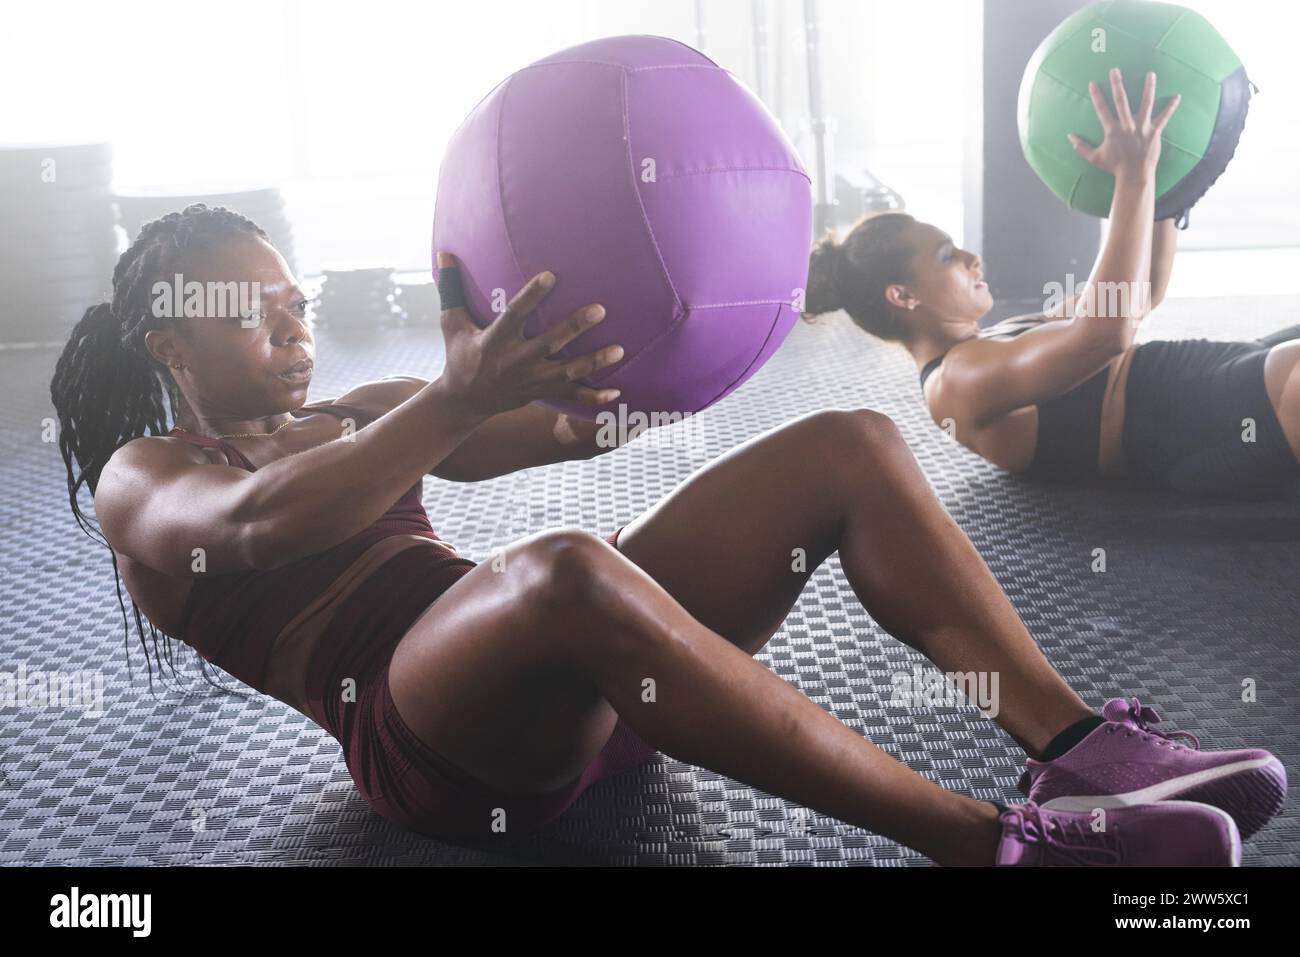 Two women engage in a gym workout with medicine balls in a gym Stock Photo